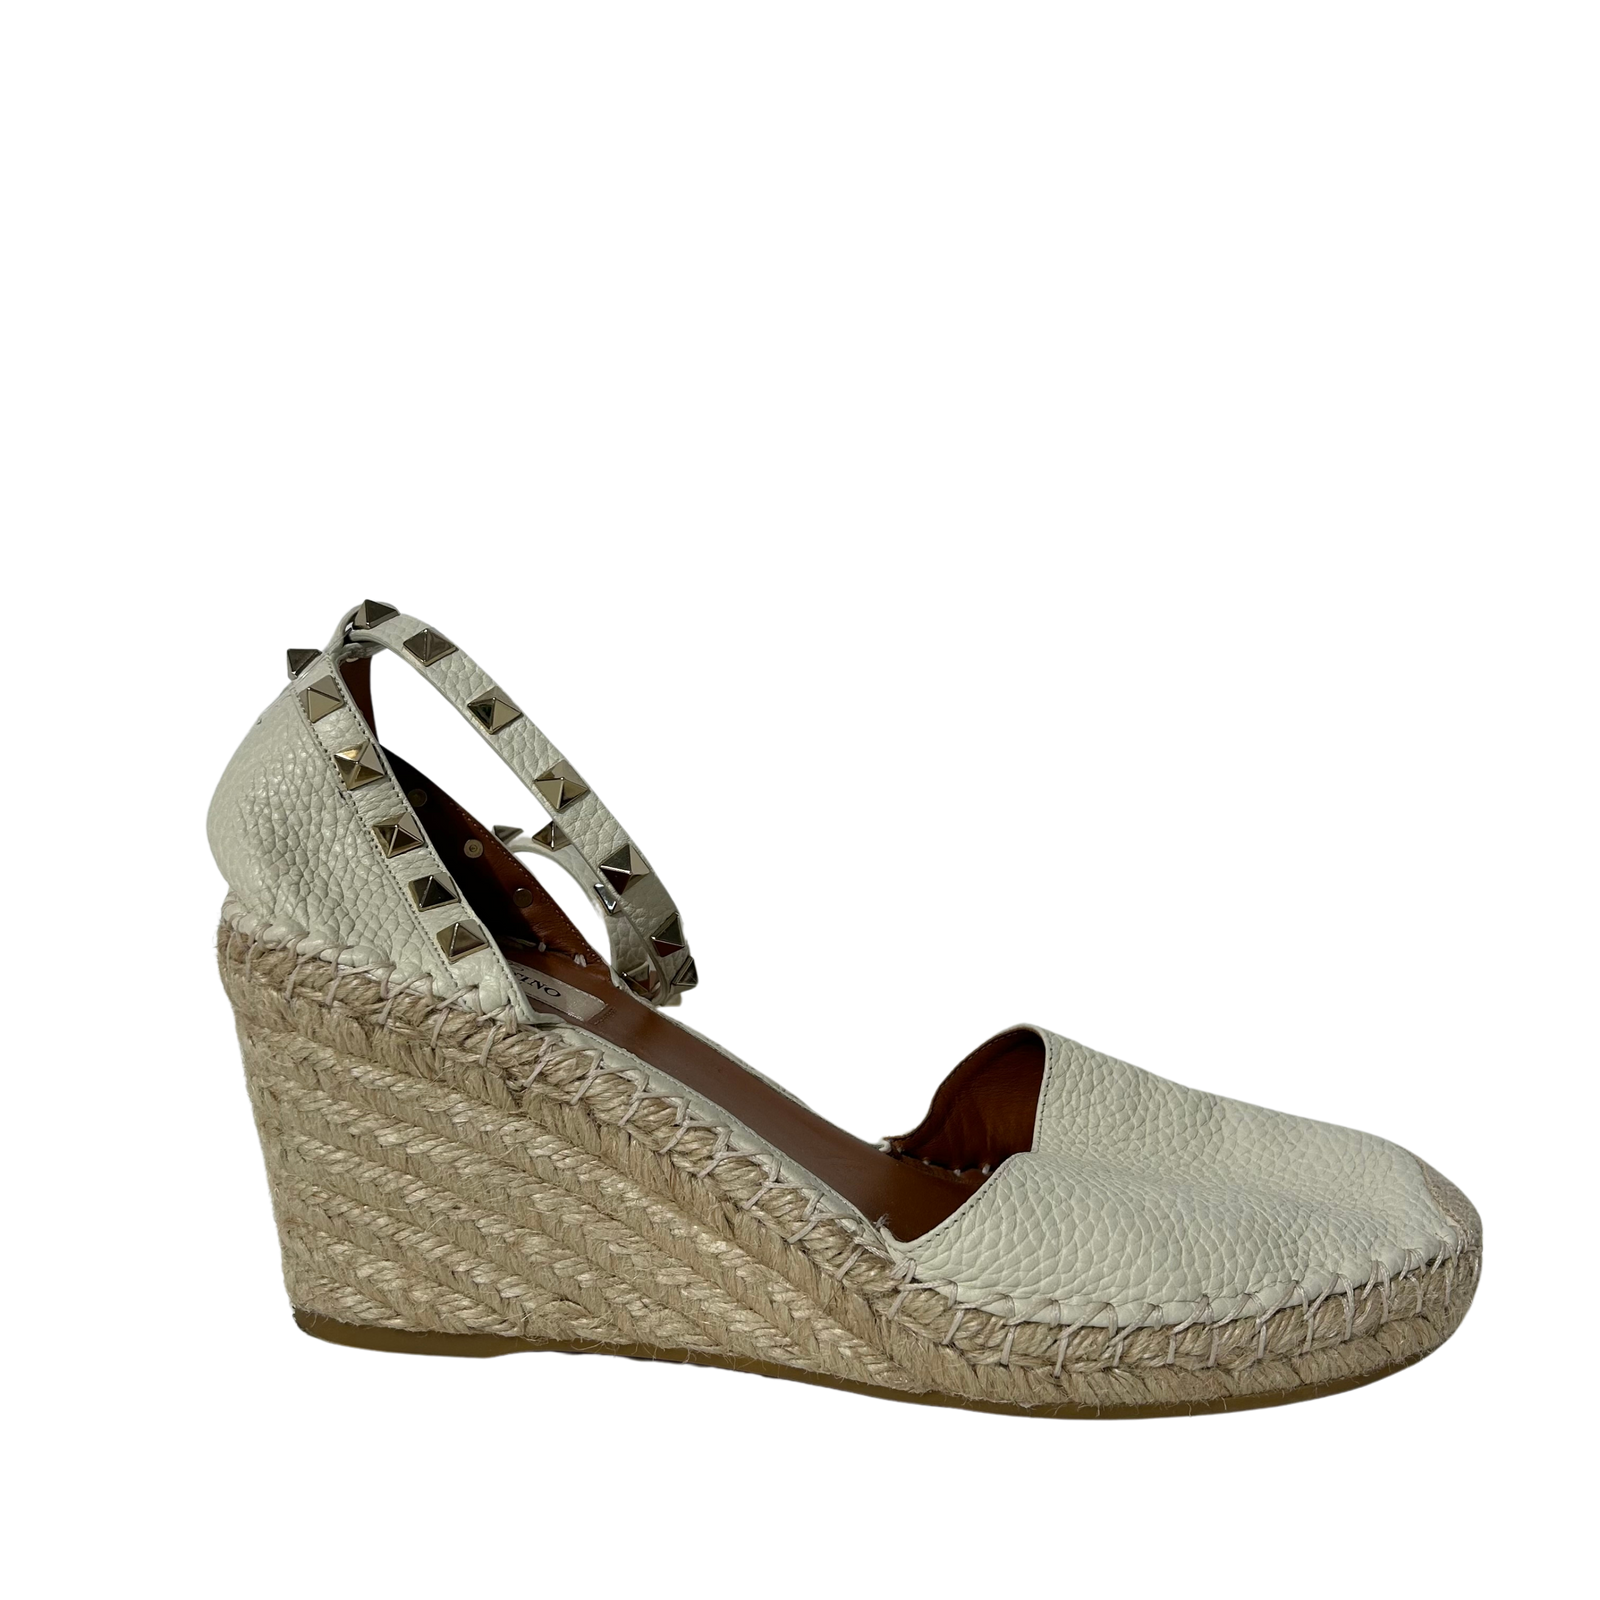 White Leather Rockstud Espadrille Wedge Ankle Wrap 41